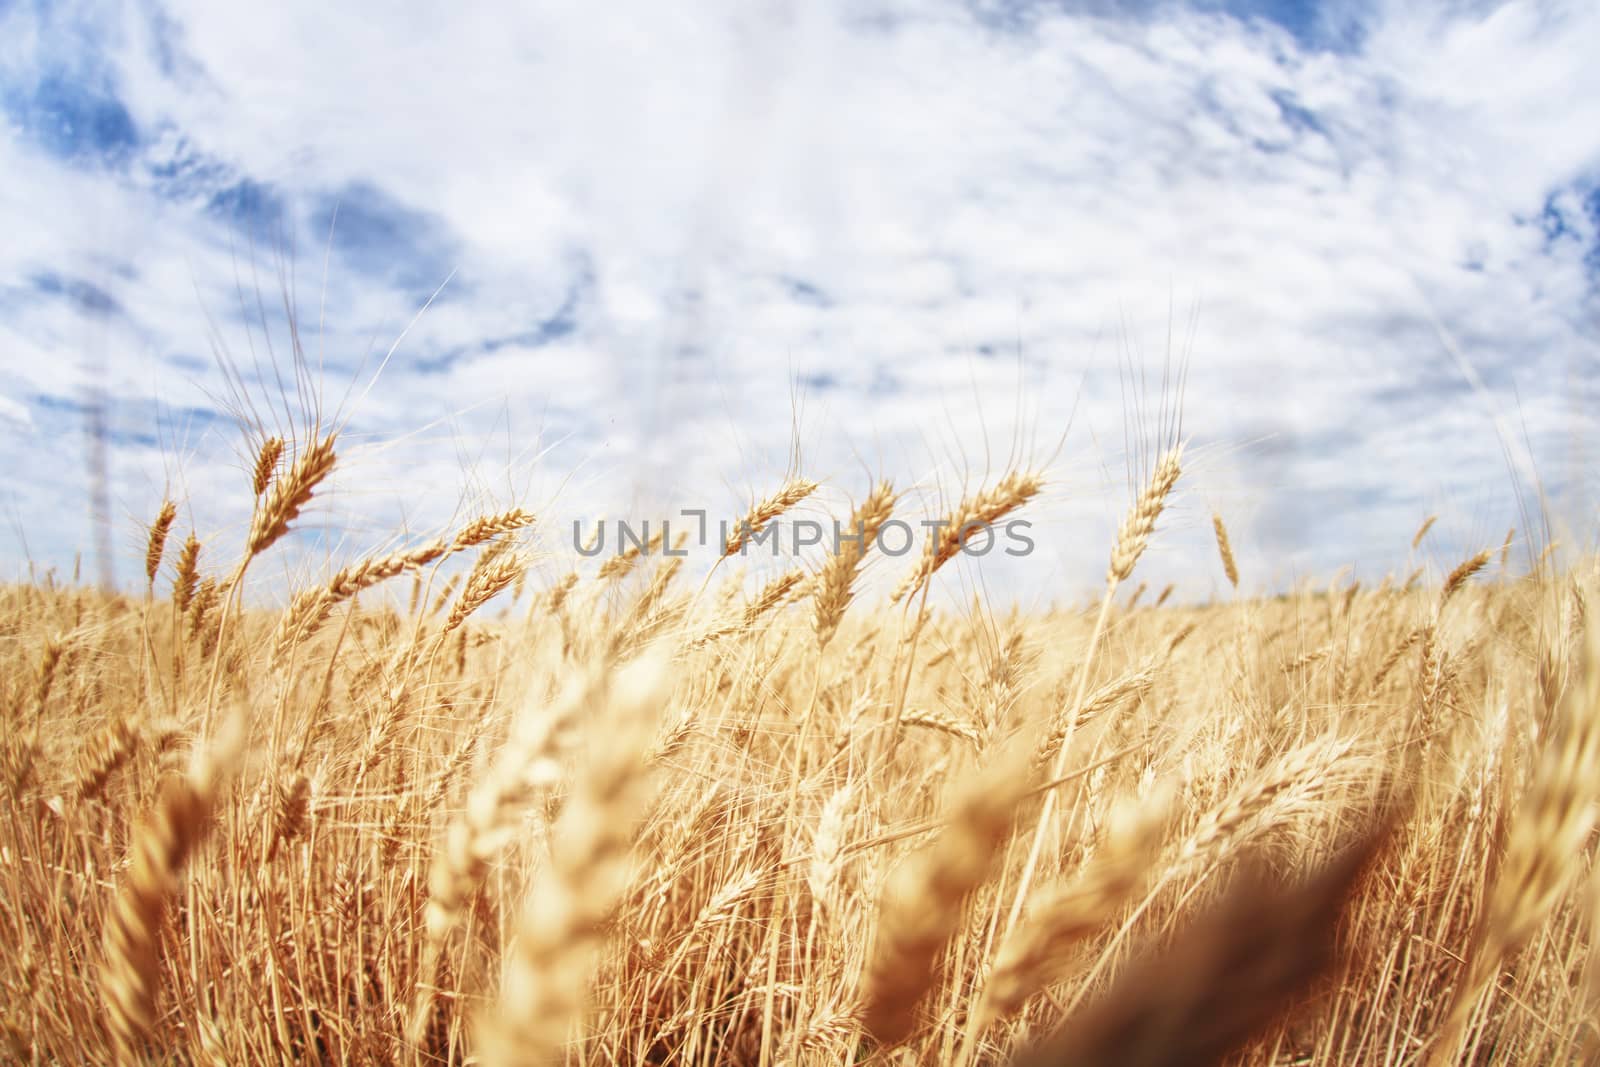 Summer field with golden wheat and blue sky